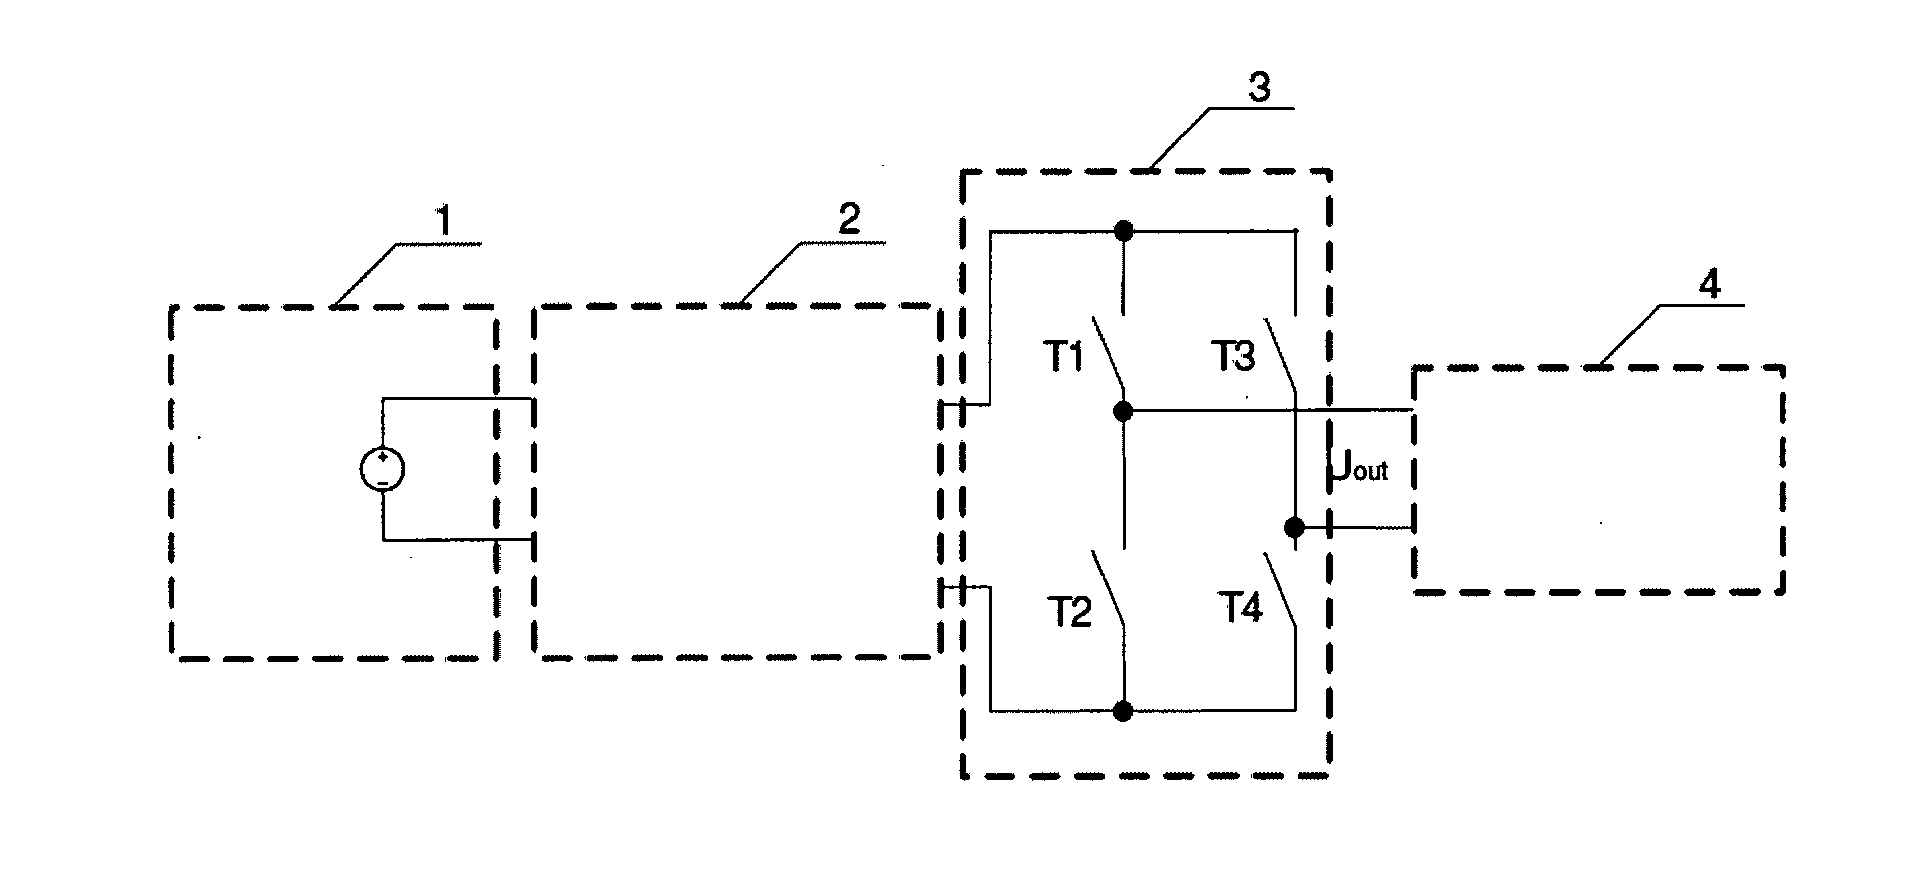 Method of shoot-through generation for modified sine wave z-source, quasi-z-source and trans-z-source inverters